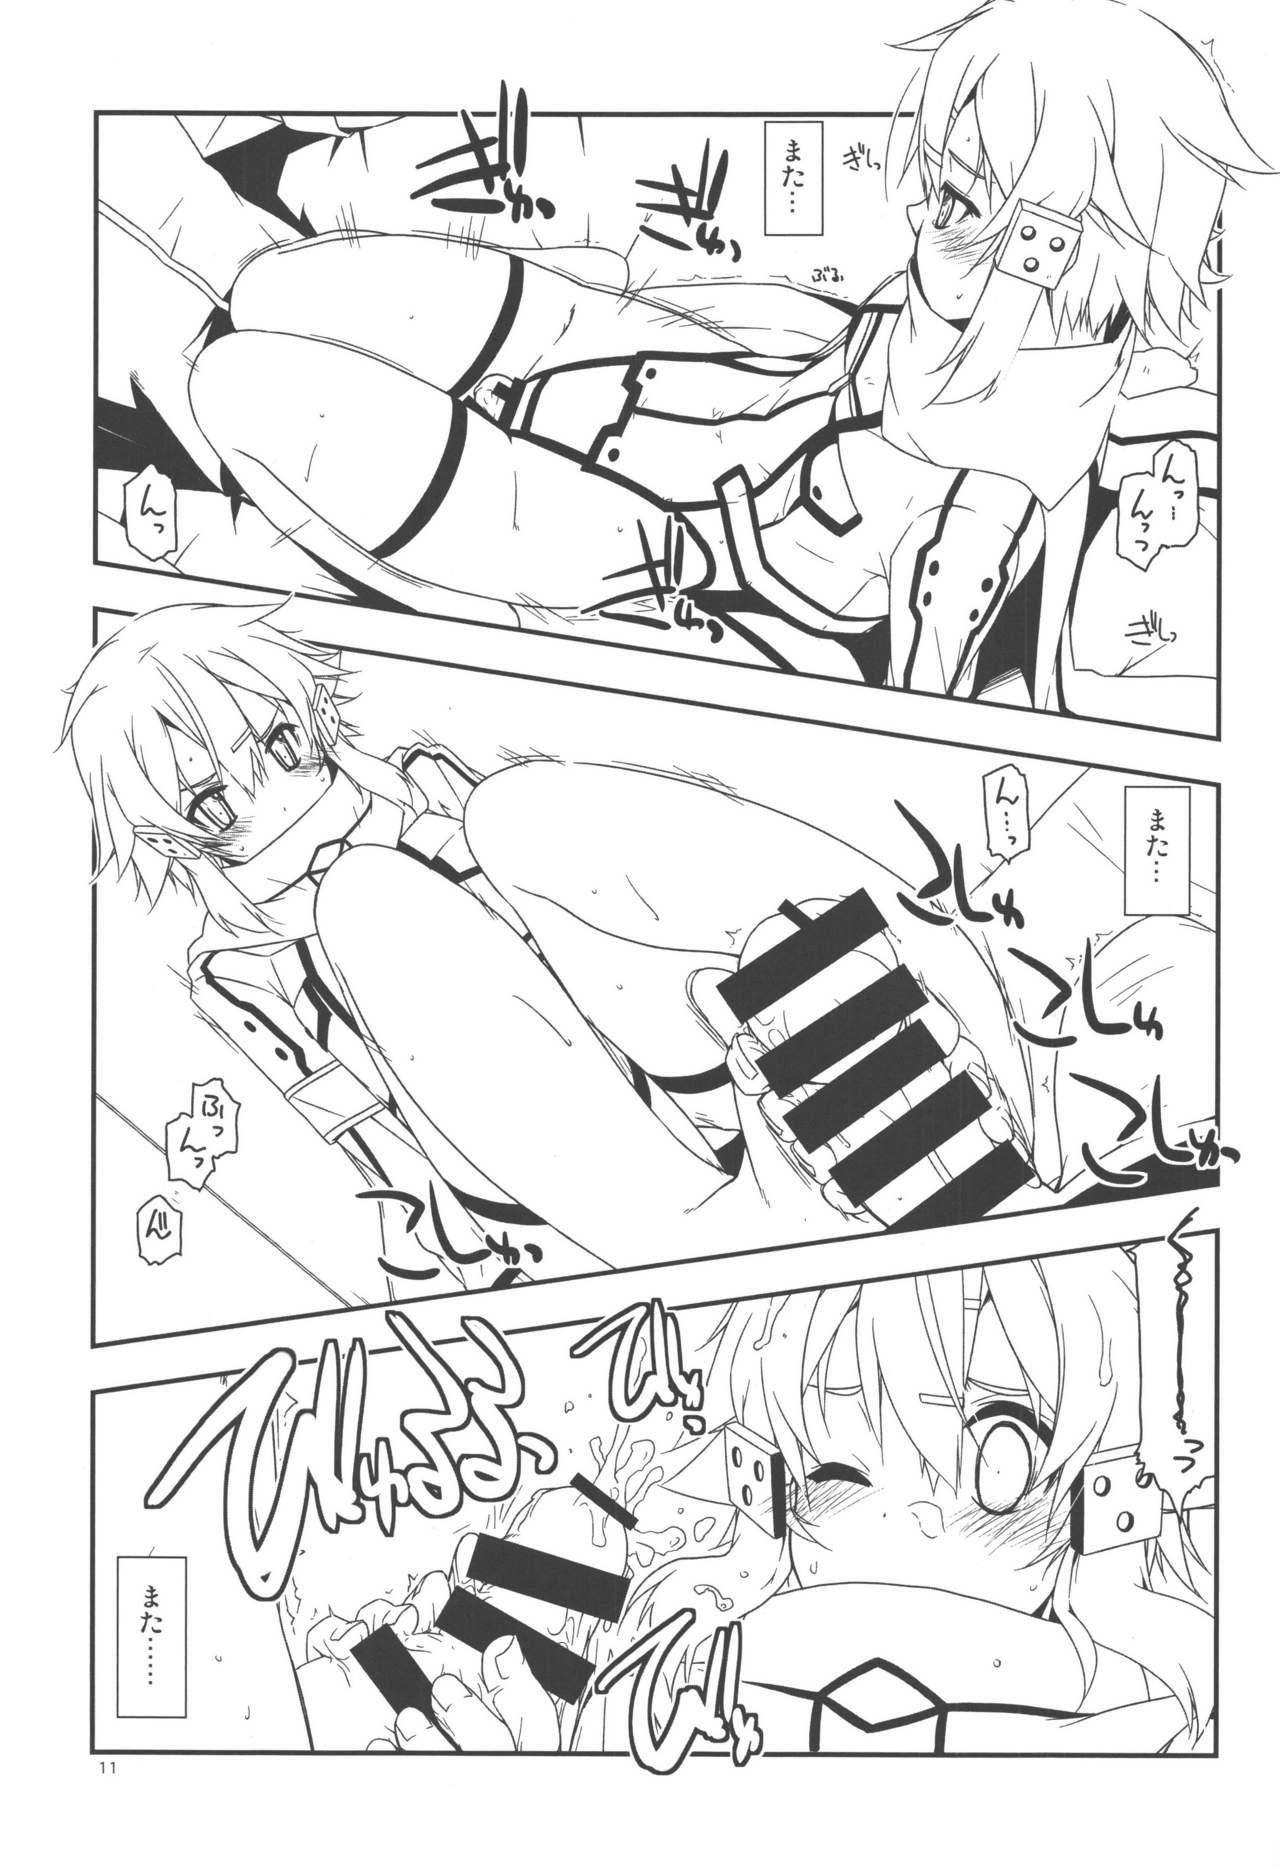 Squirting Split - Sword art online Bubblebutt - Page 11